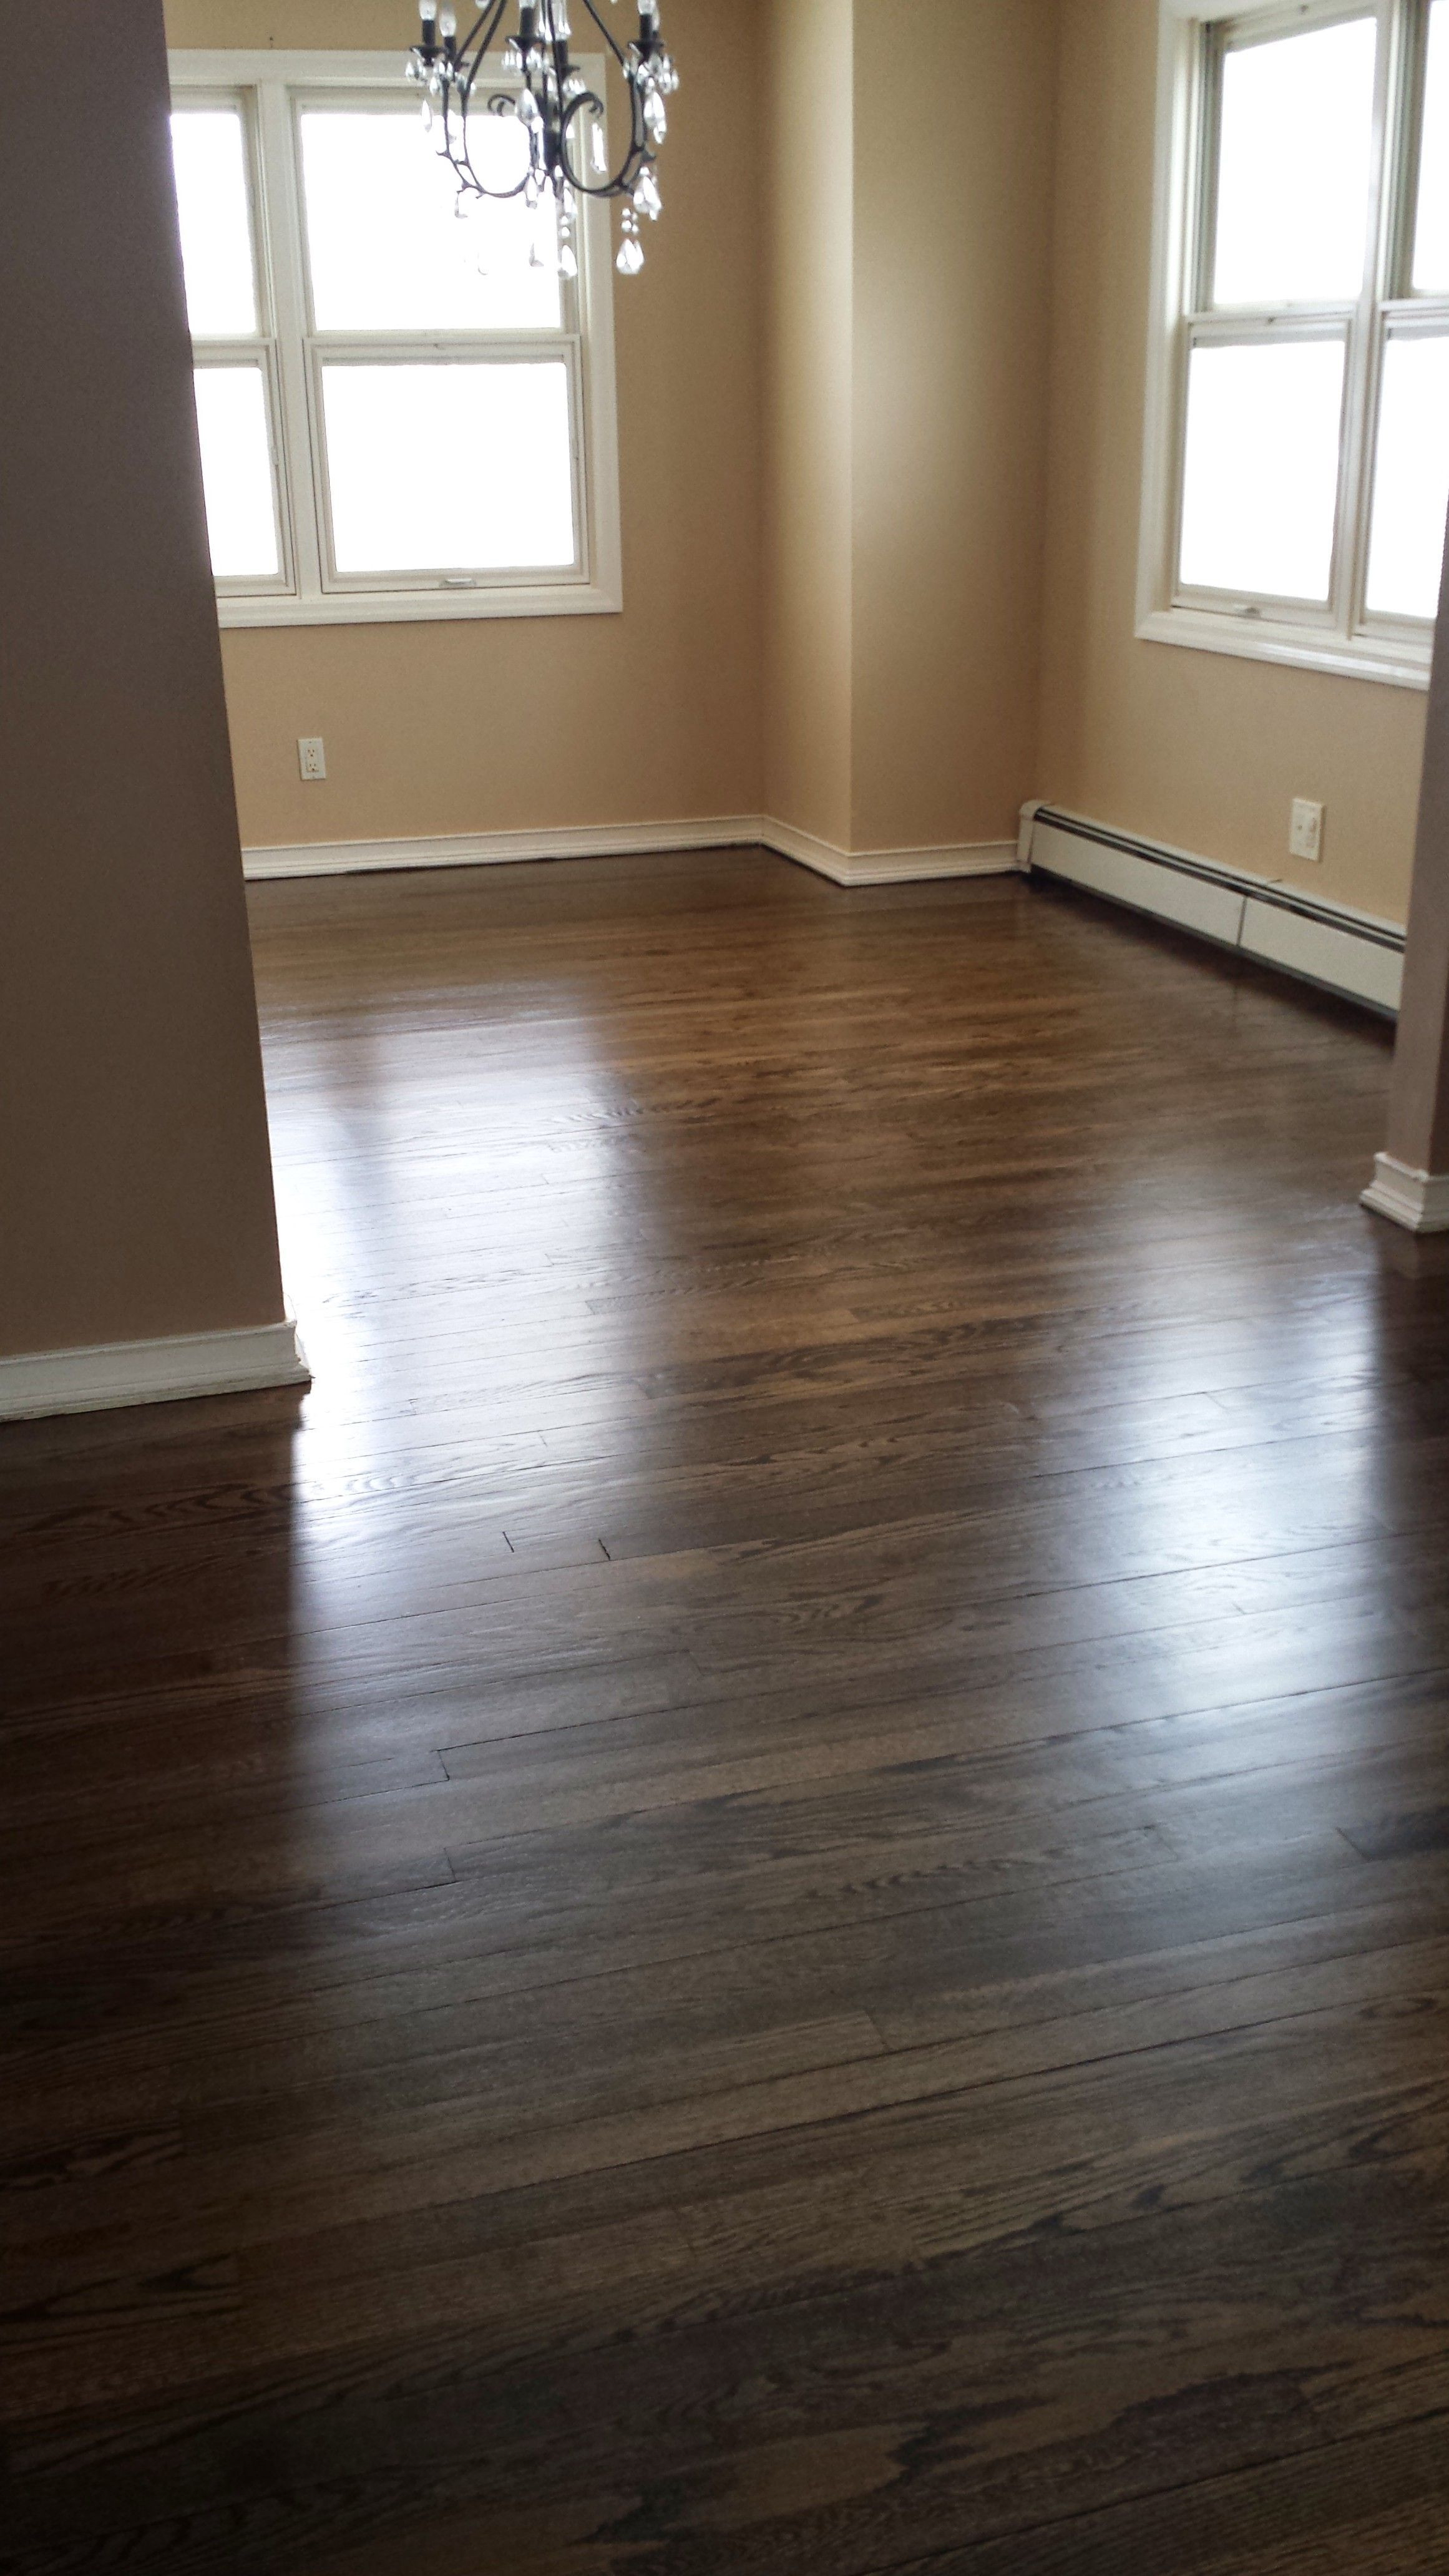 11 Ideal How to Stain Hardwood Floors 2024 free download how to stain hardwood floors of hardwood floor refinishing is an affordable way to spruce up your within hardwood floor refinishing is an affordable way to spruce up your space without a ful